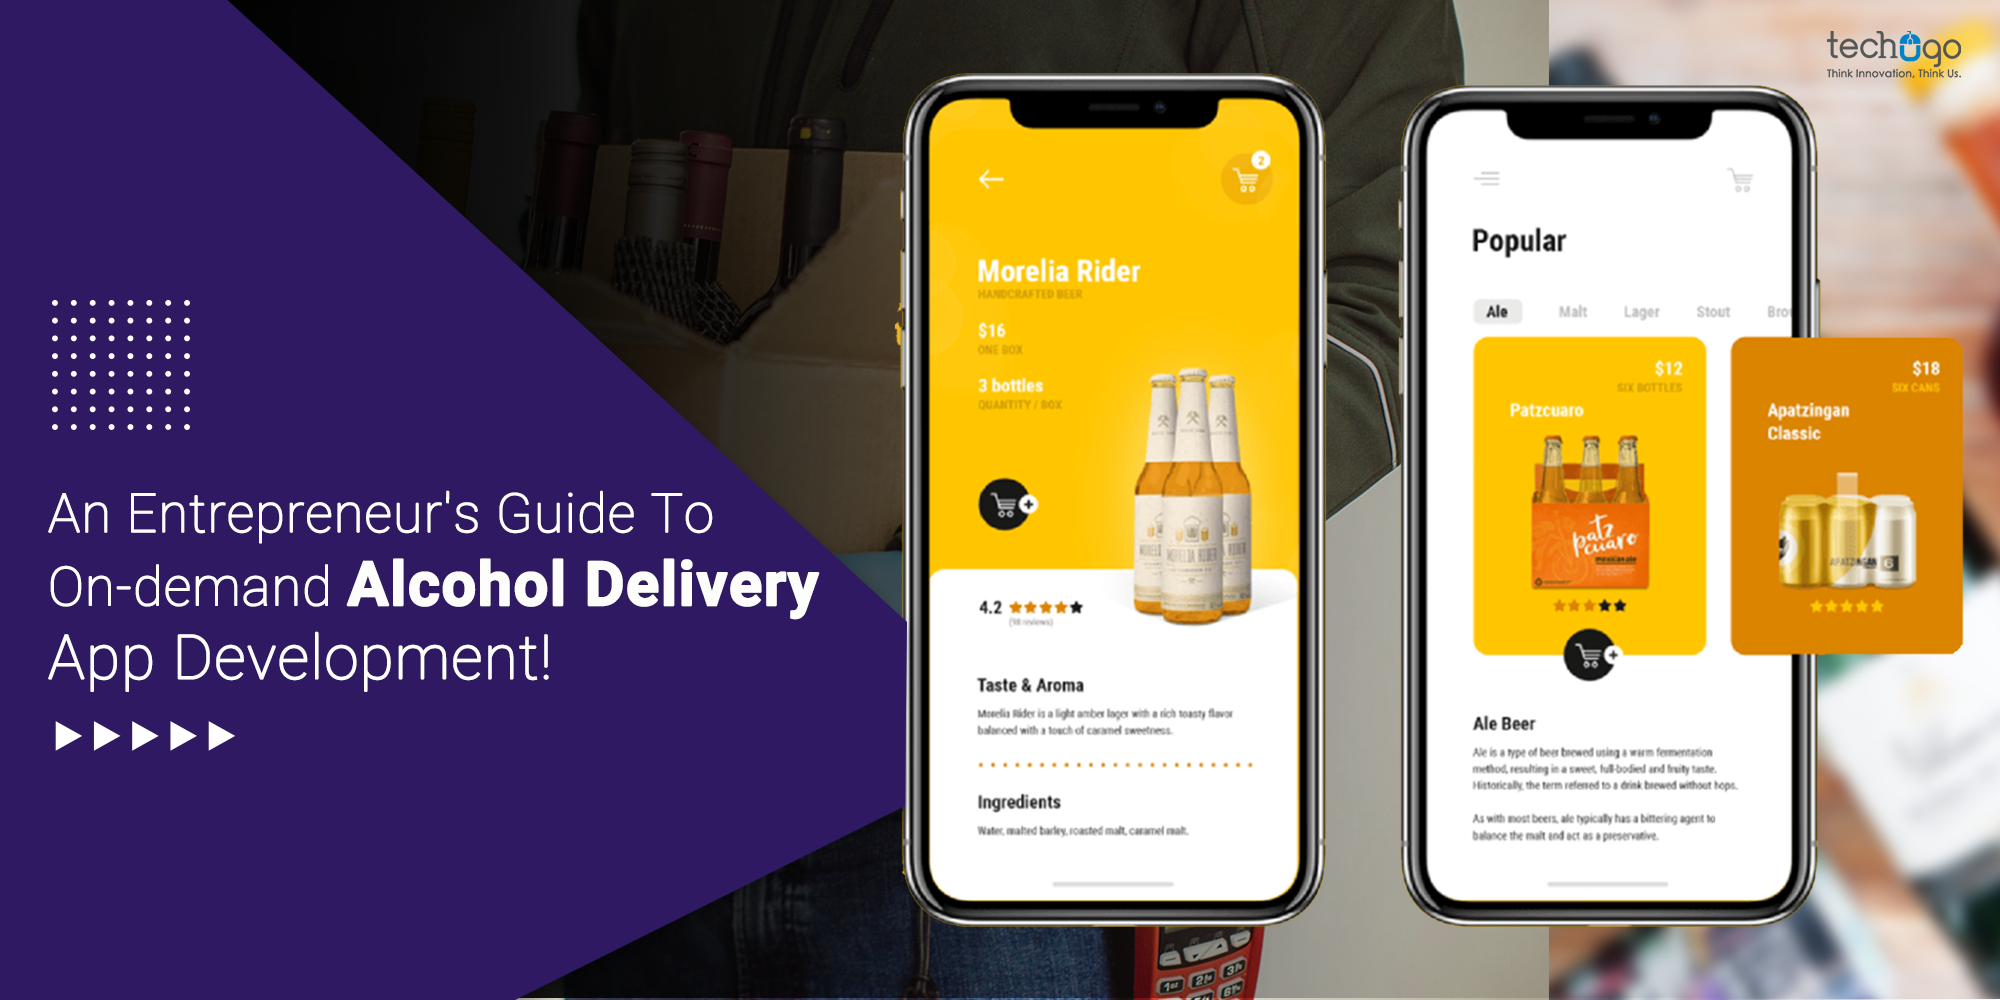 An Entrepreneur’s Guide To On-demand Alcohol Delivery App Development!